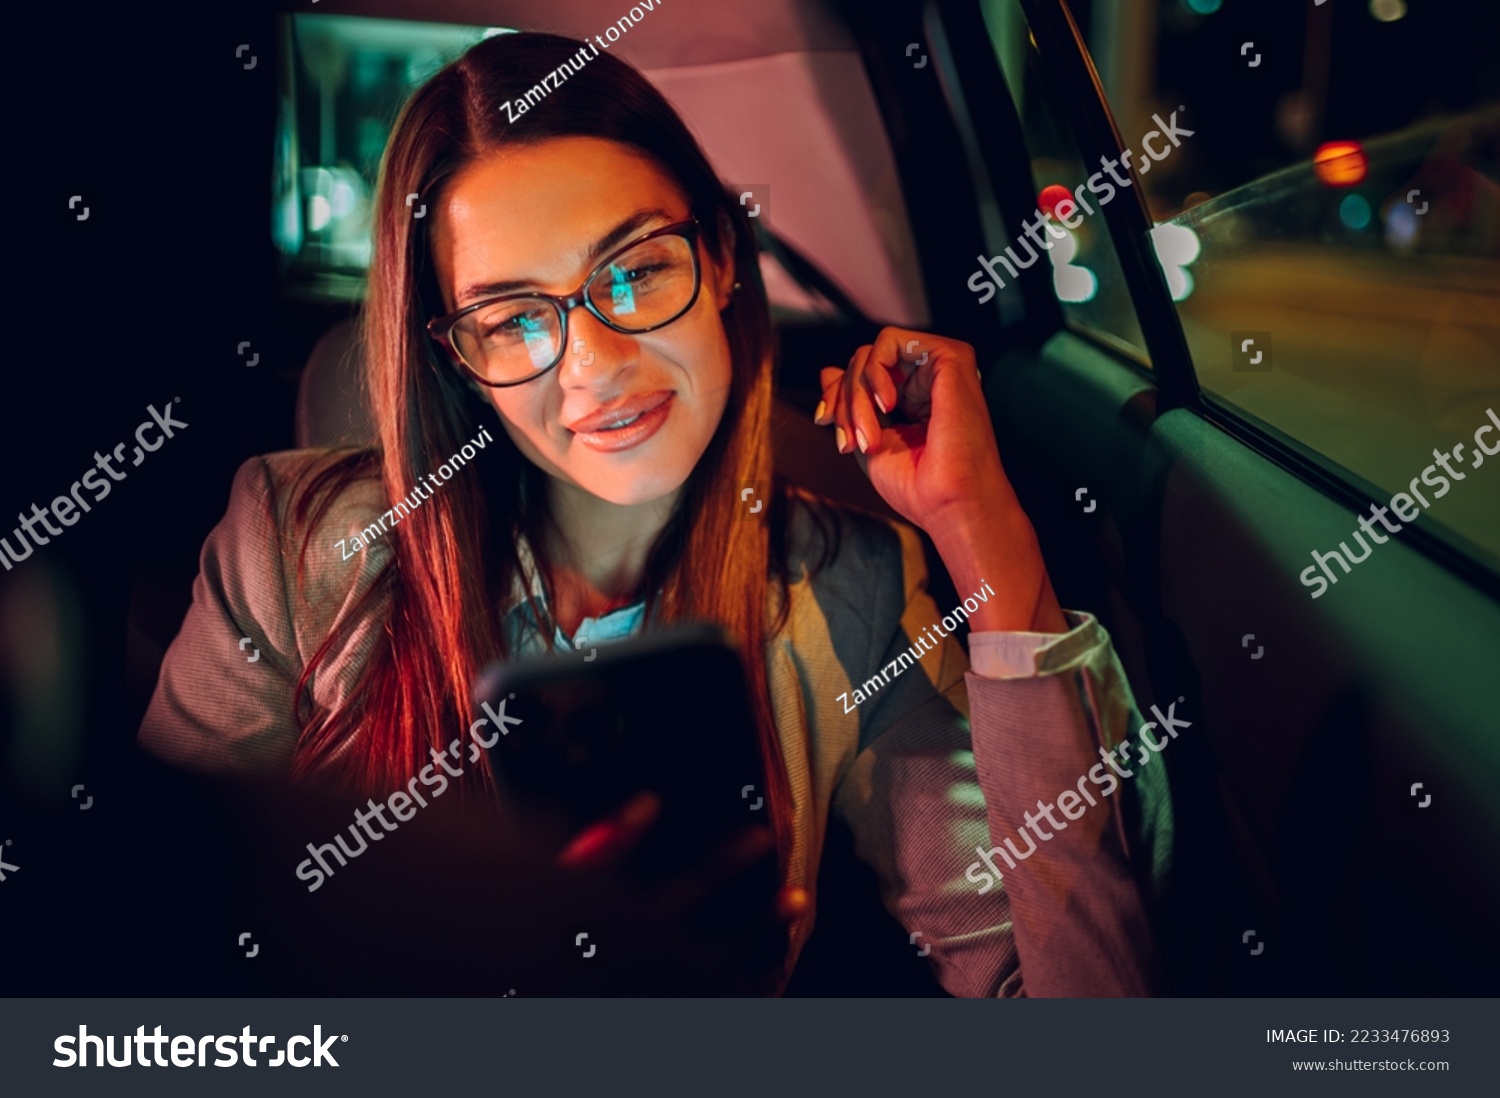 Portrait of a businesswoman commuting from office in a taxi backseat and using a smartphone in city at night after late work. Beautiful female using mobile phone while sitting on a backseat of a car. #2233476893